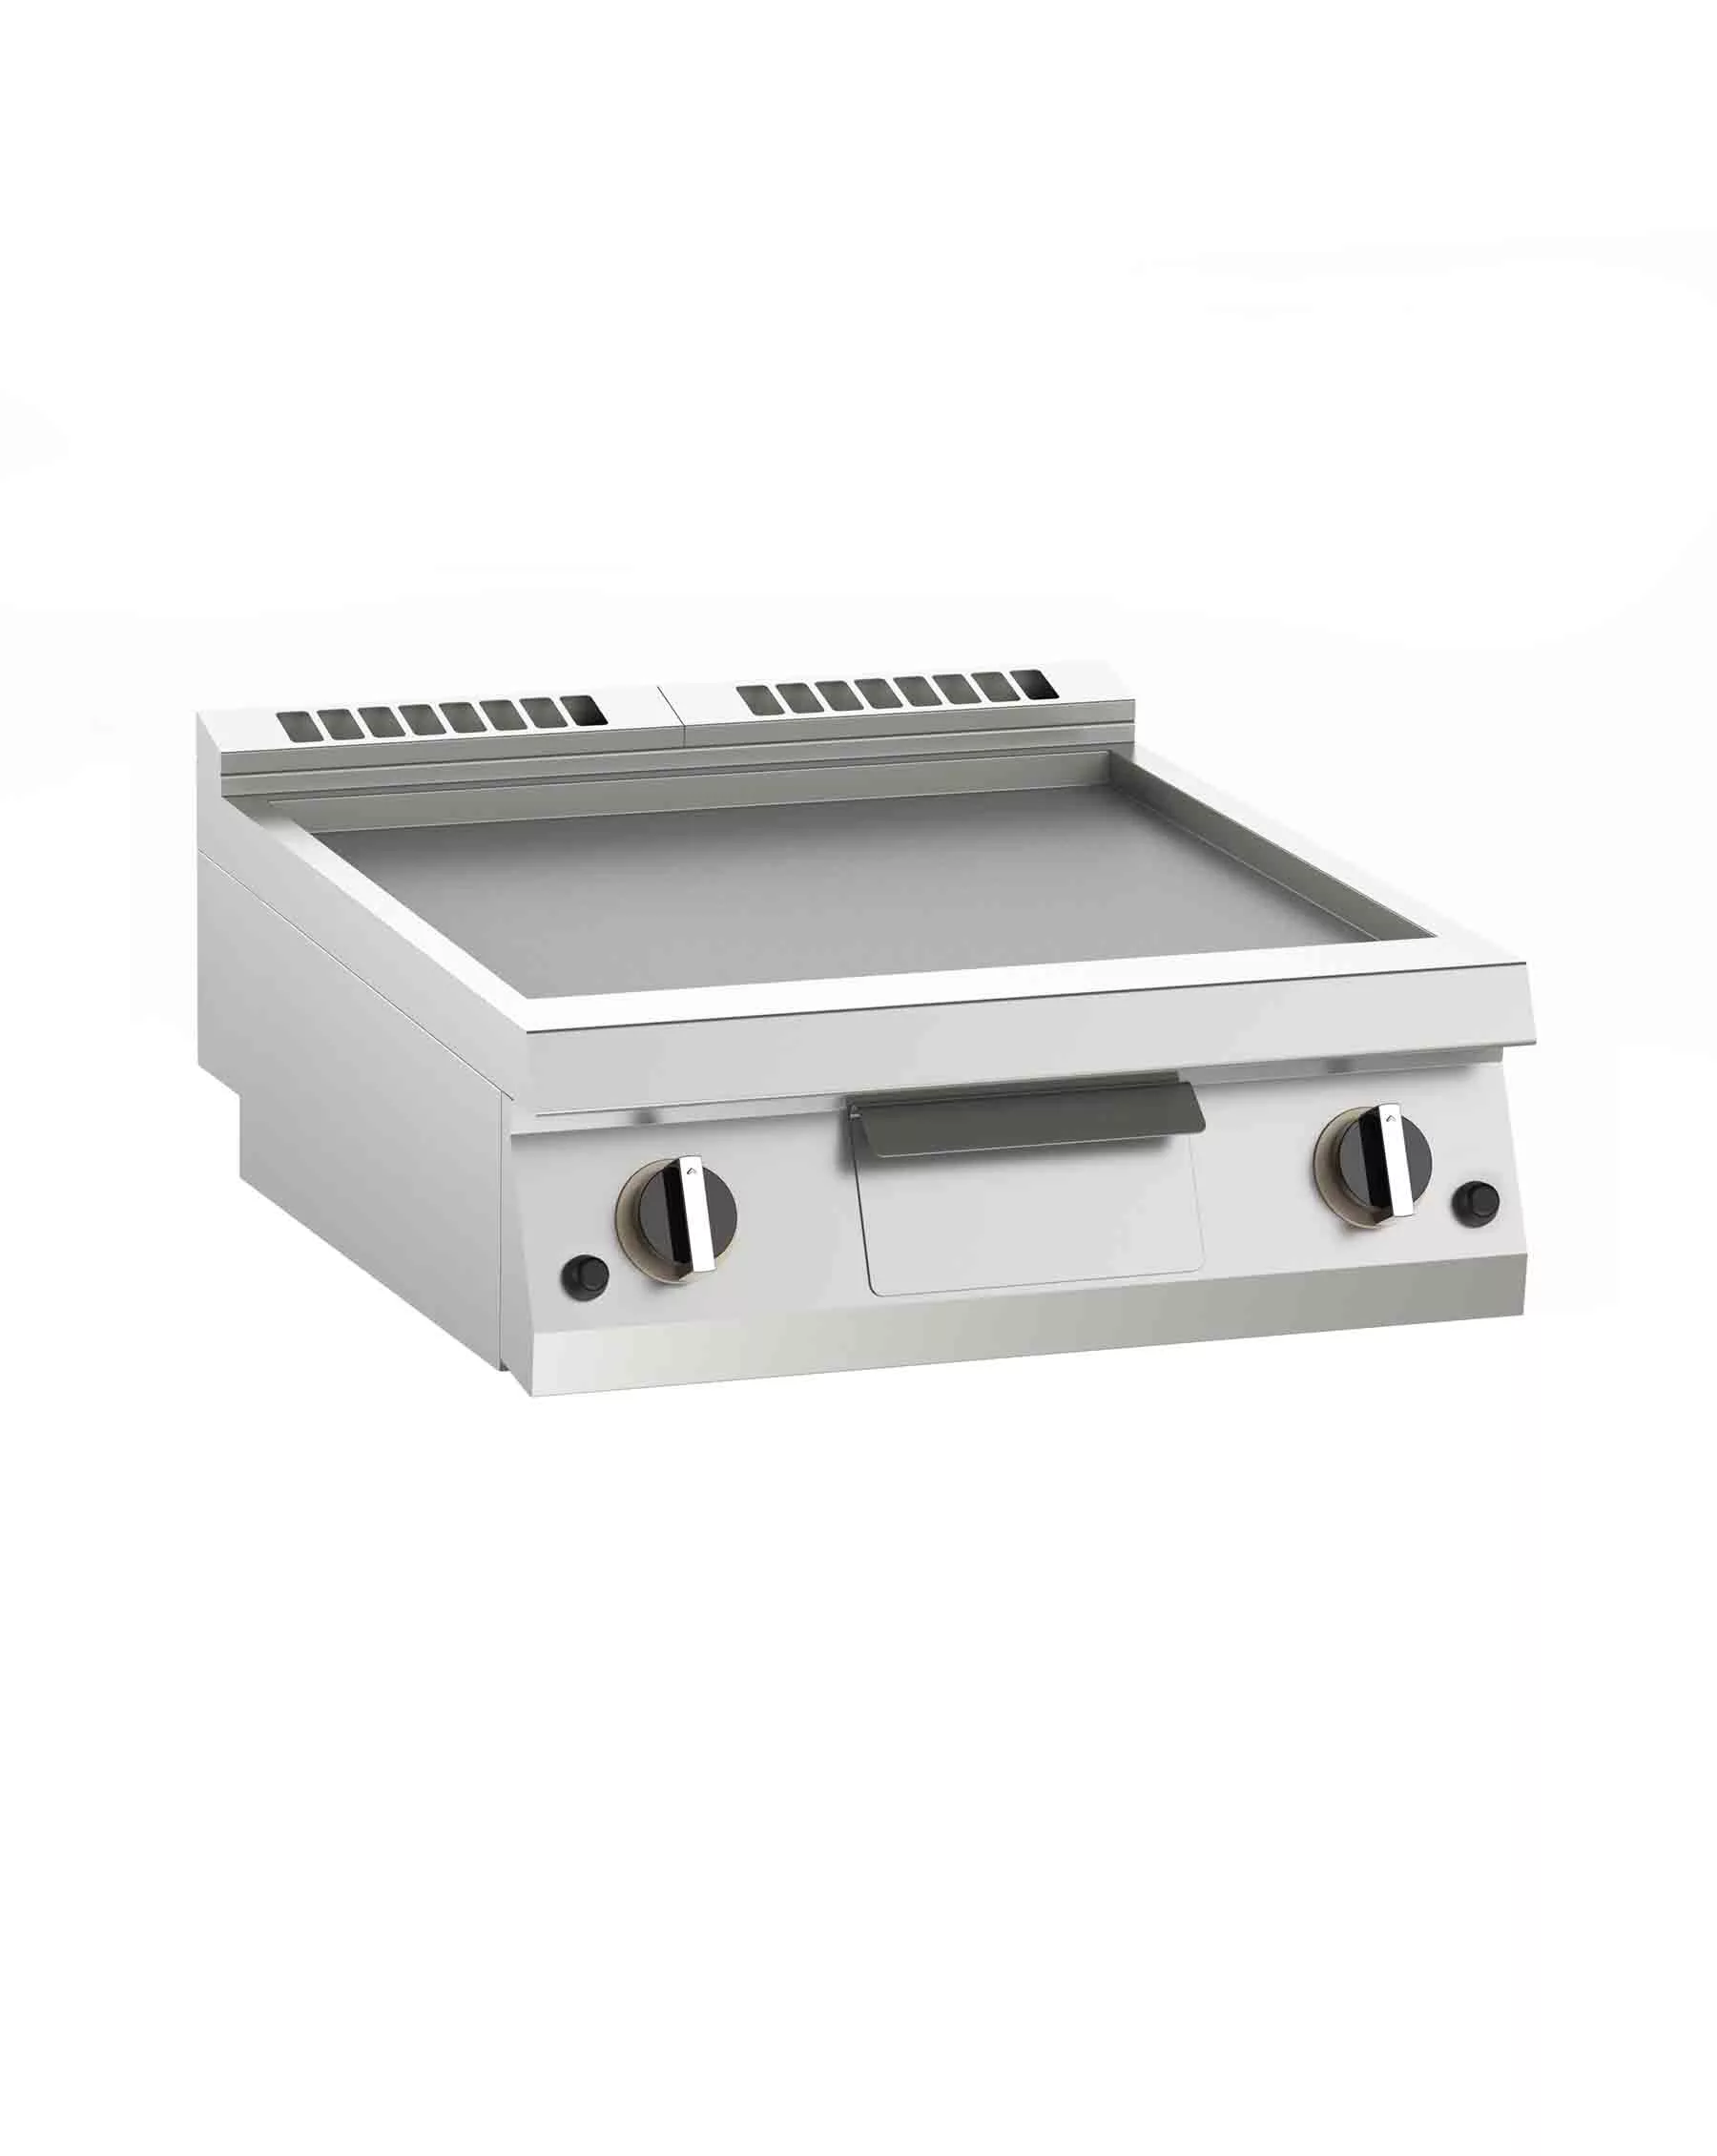 gas griddle with smooth plate